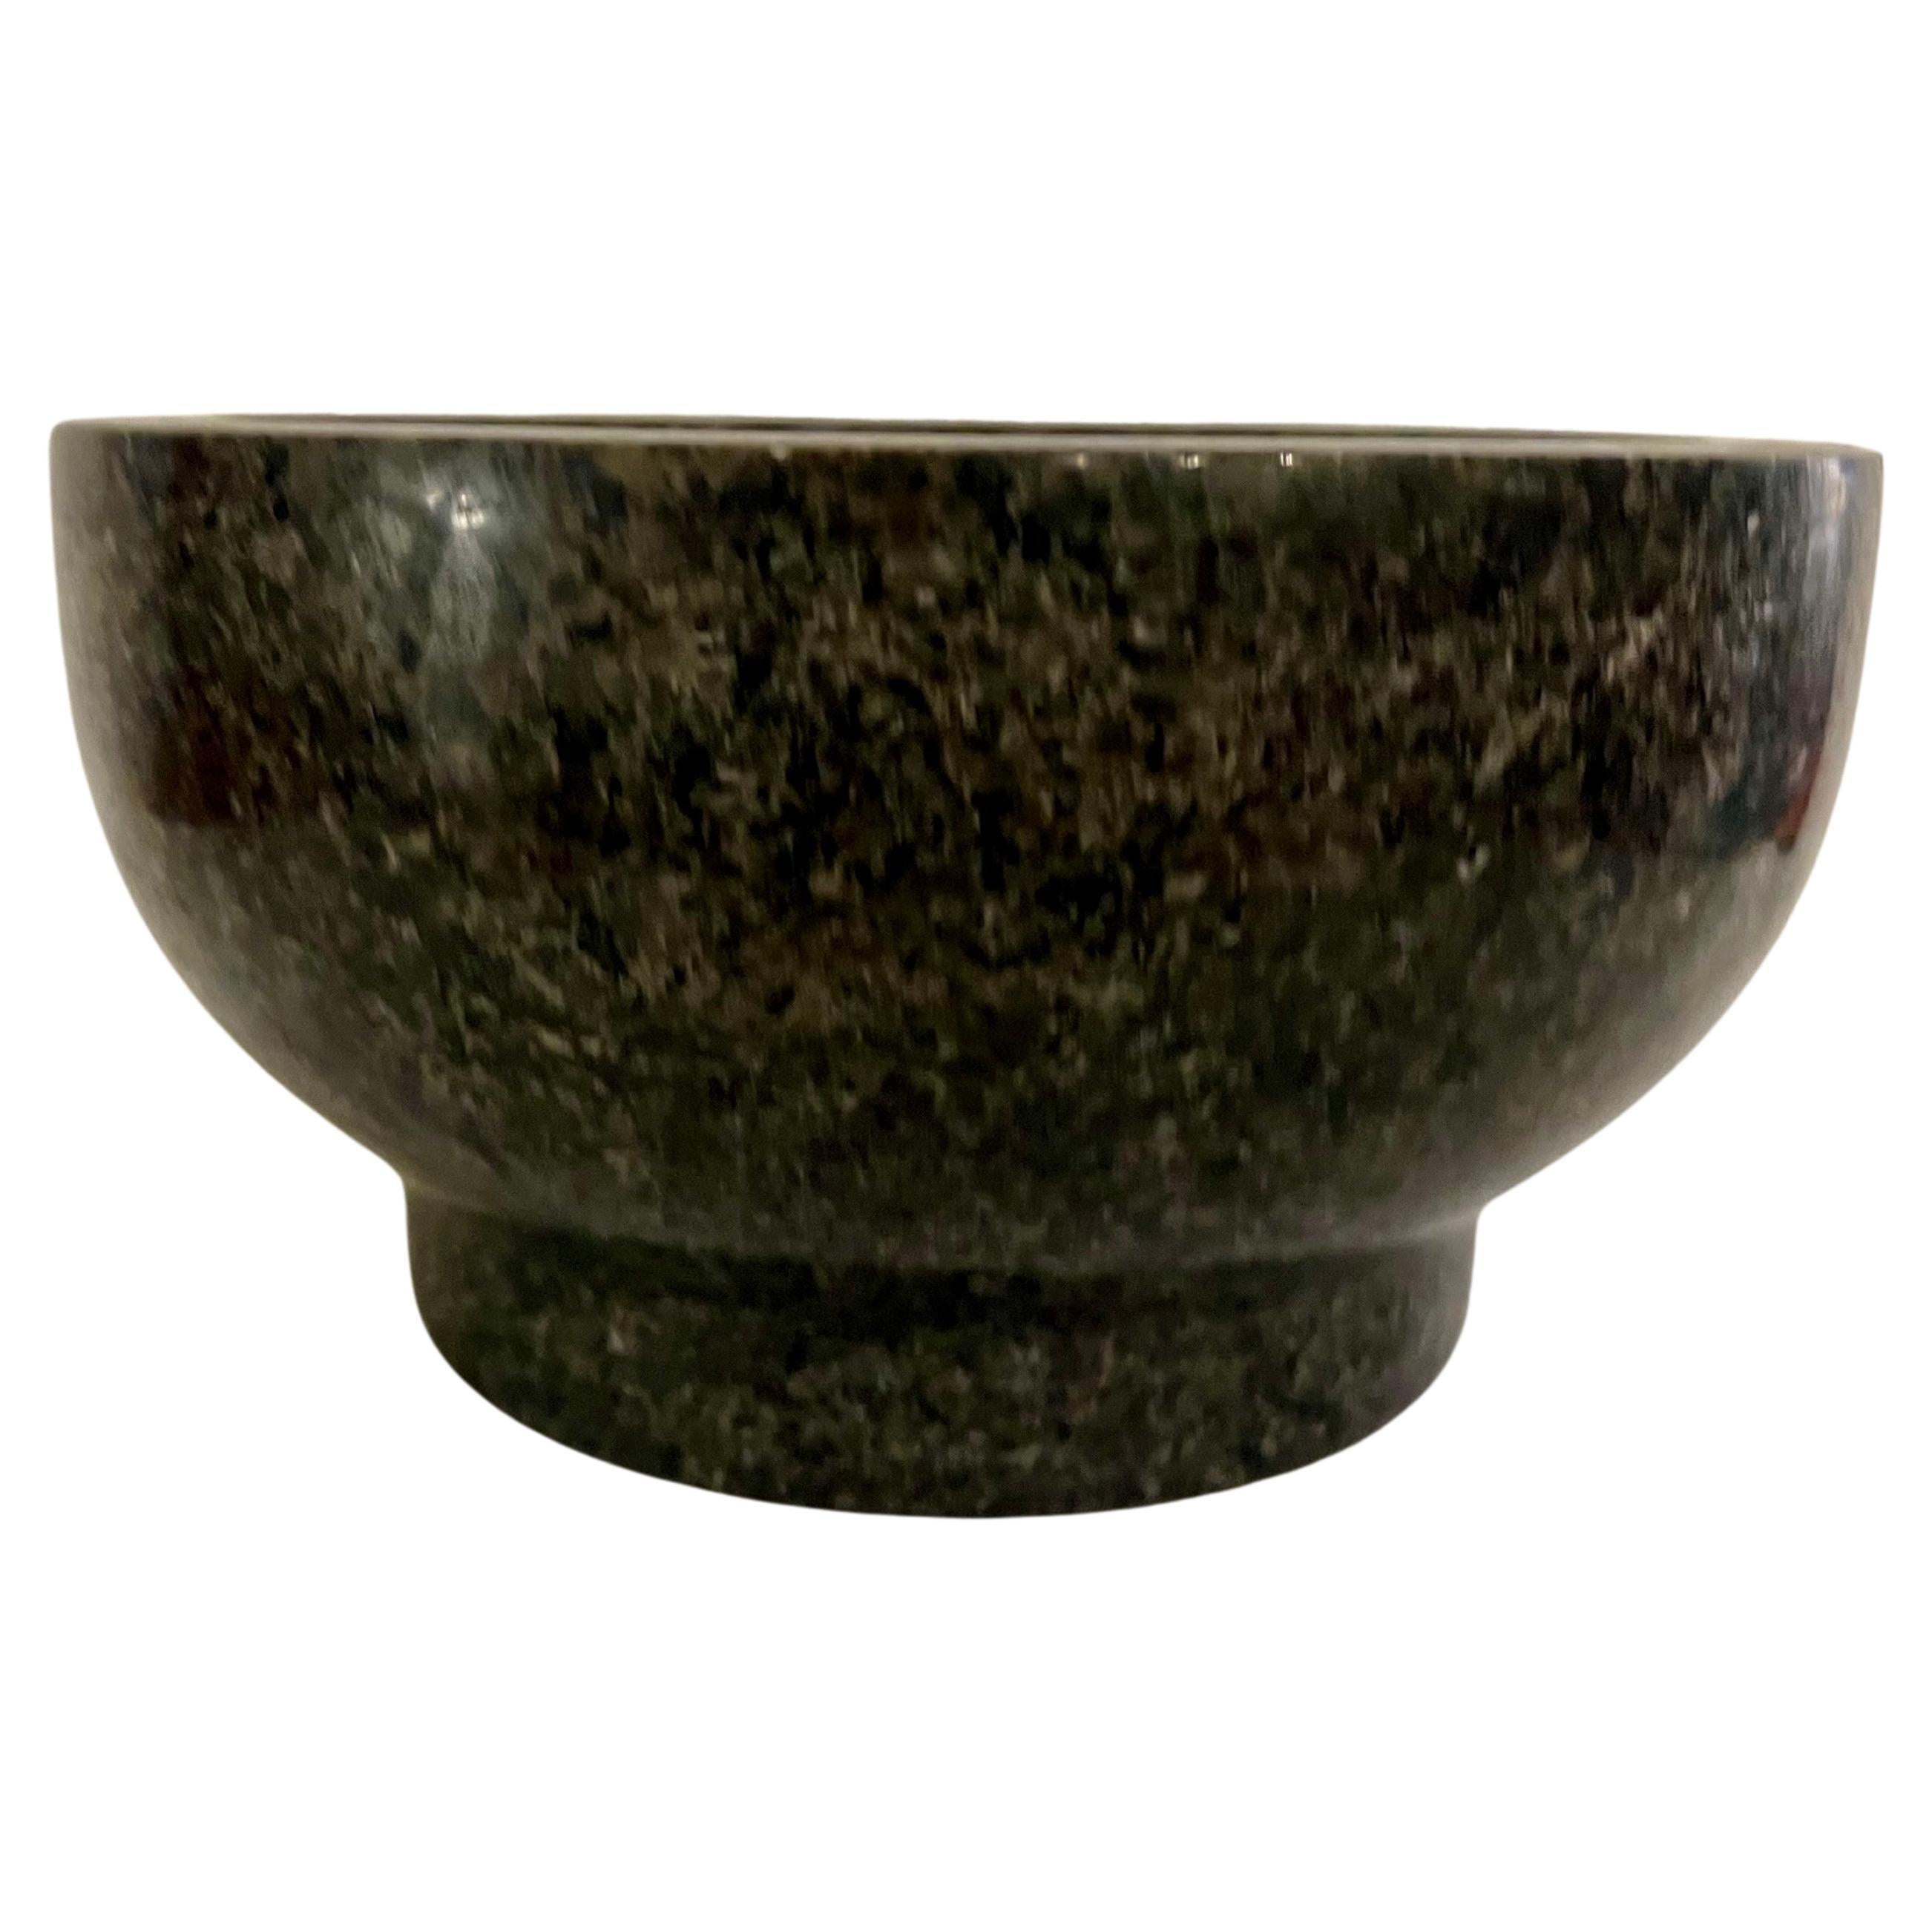 Postmodern Solid Polished Granite Massive Italian Footed Compote Bowl